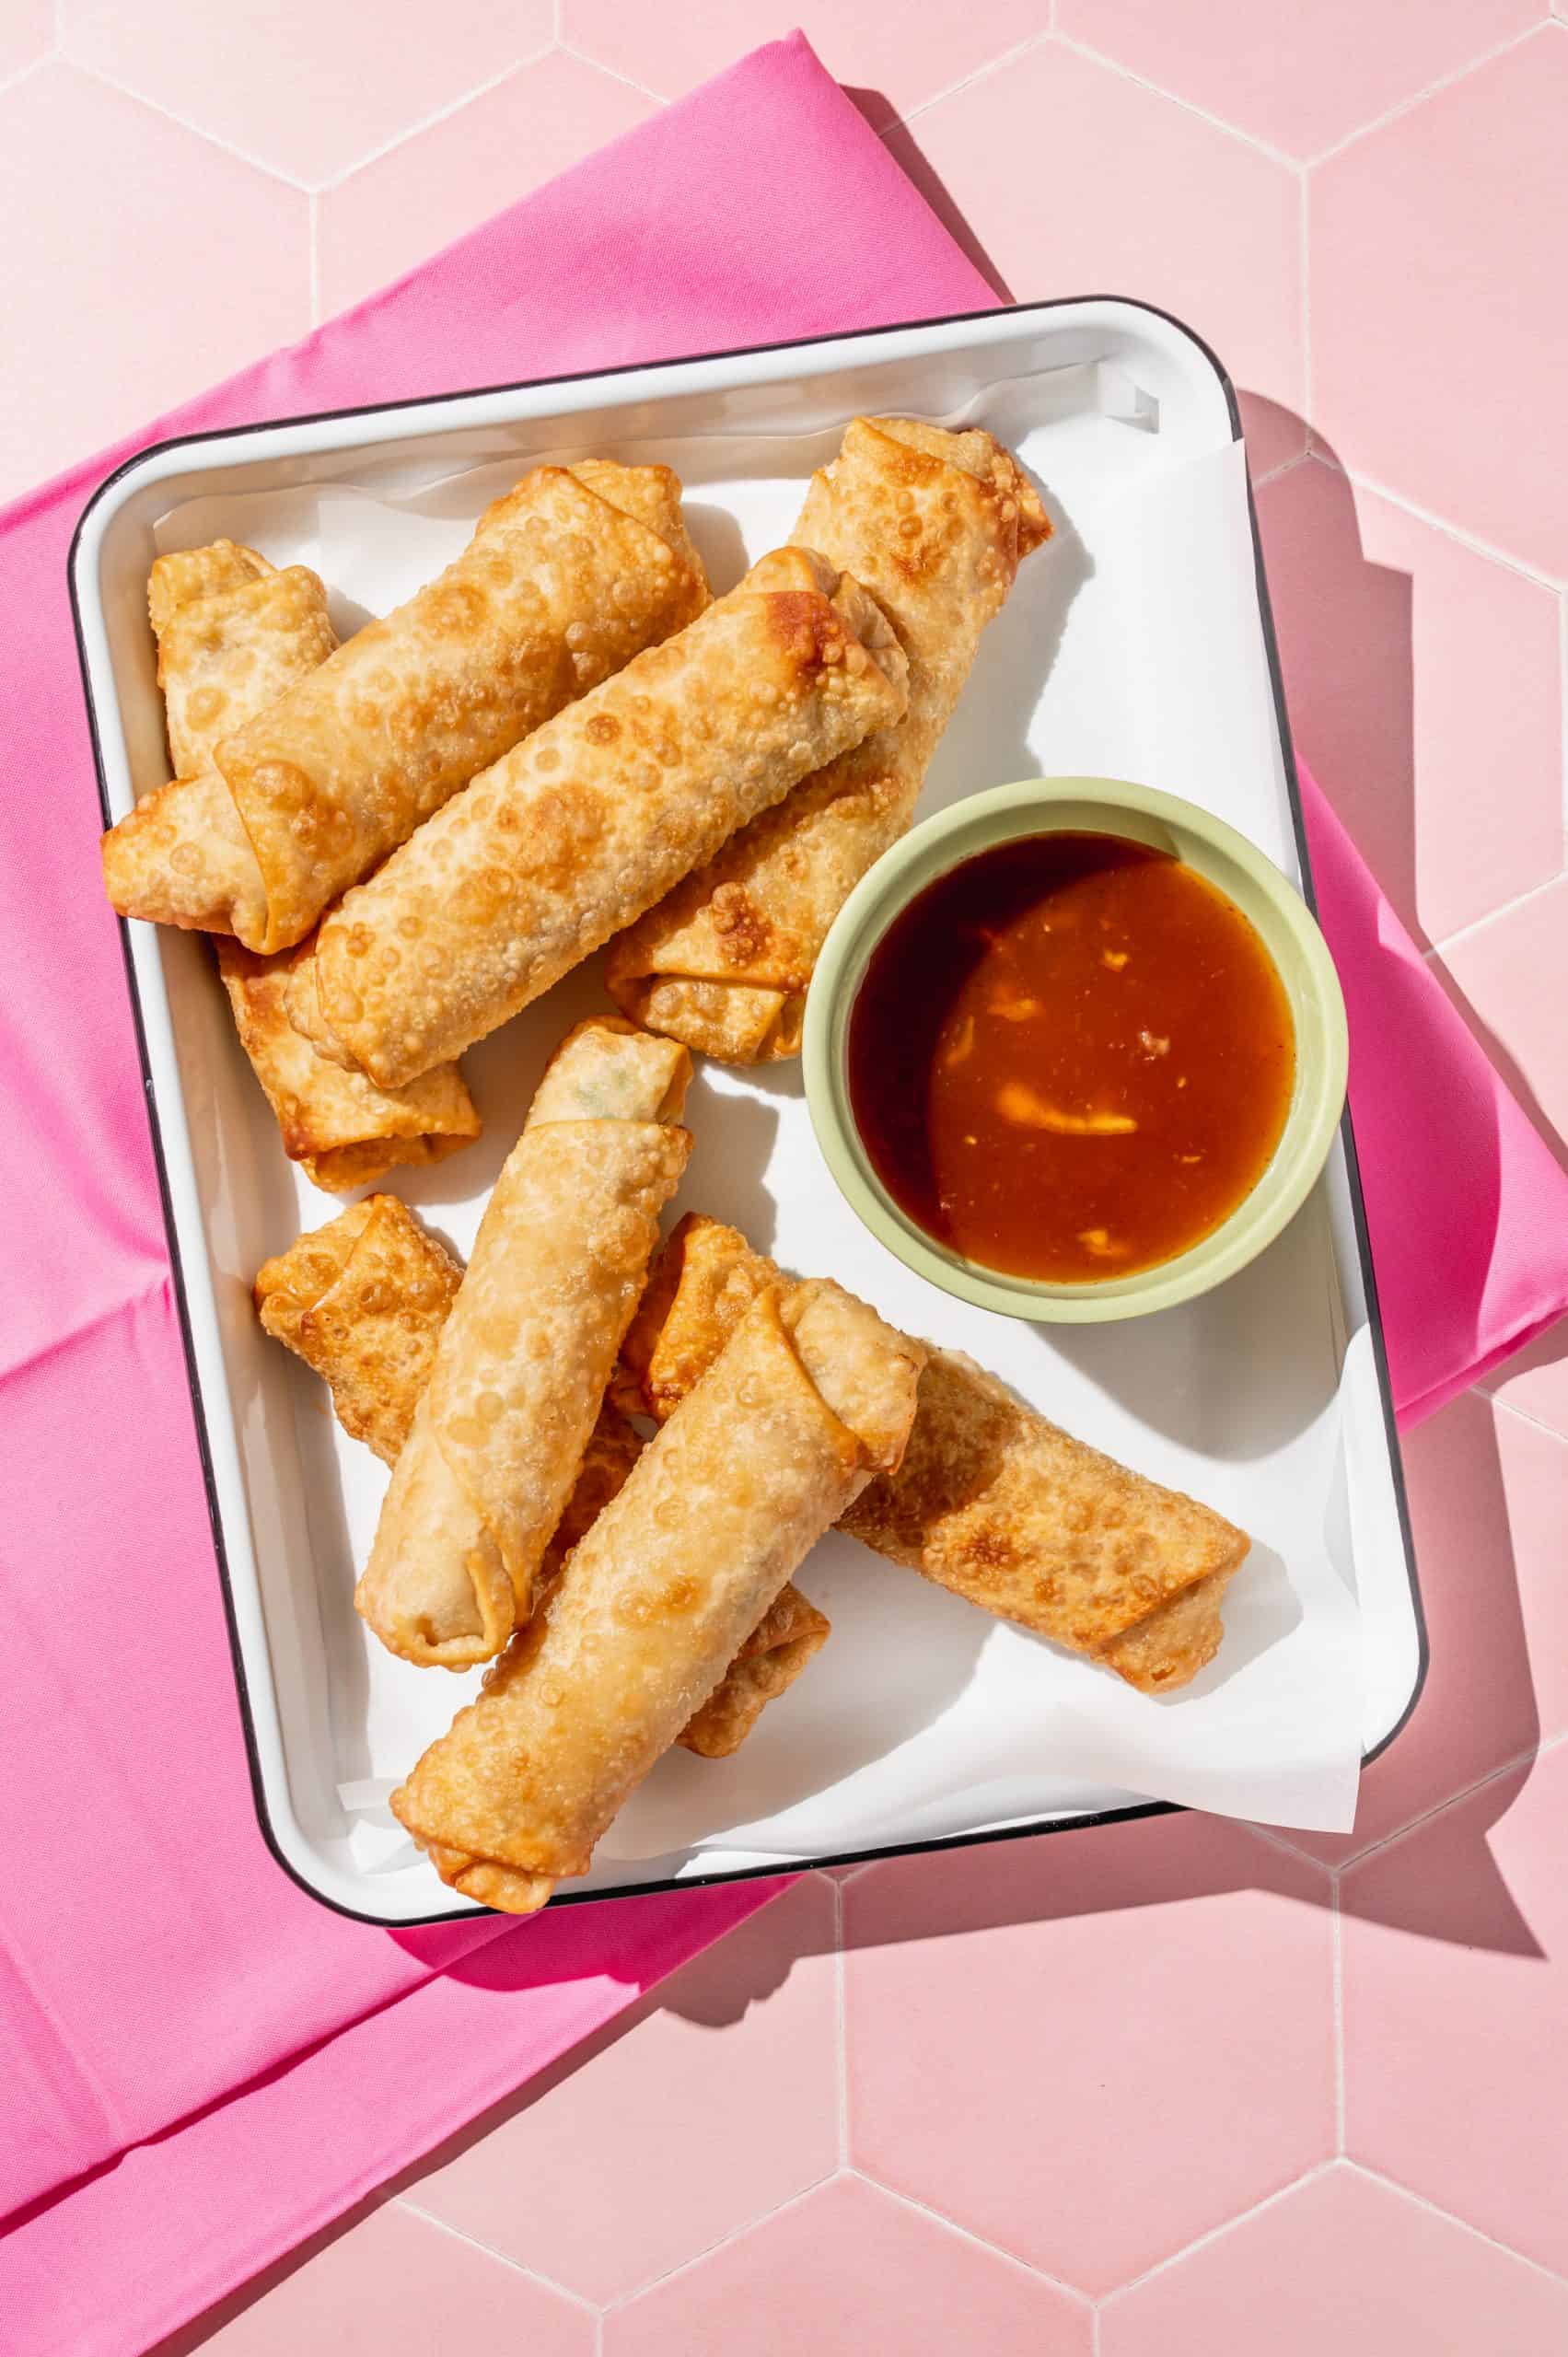 8 fried crab rangoon egg rolls on a tray with cup of sweet chili dipping sauce